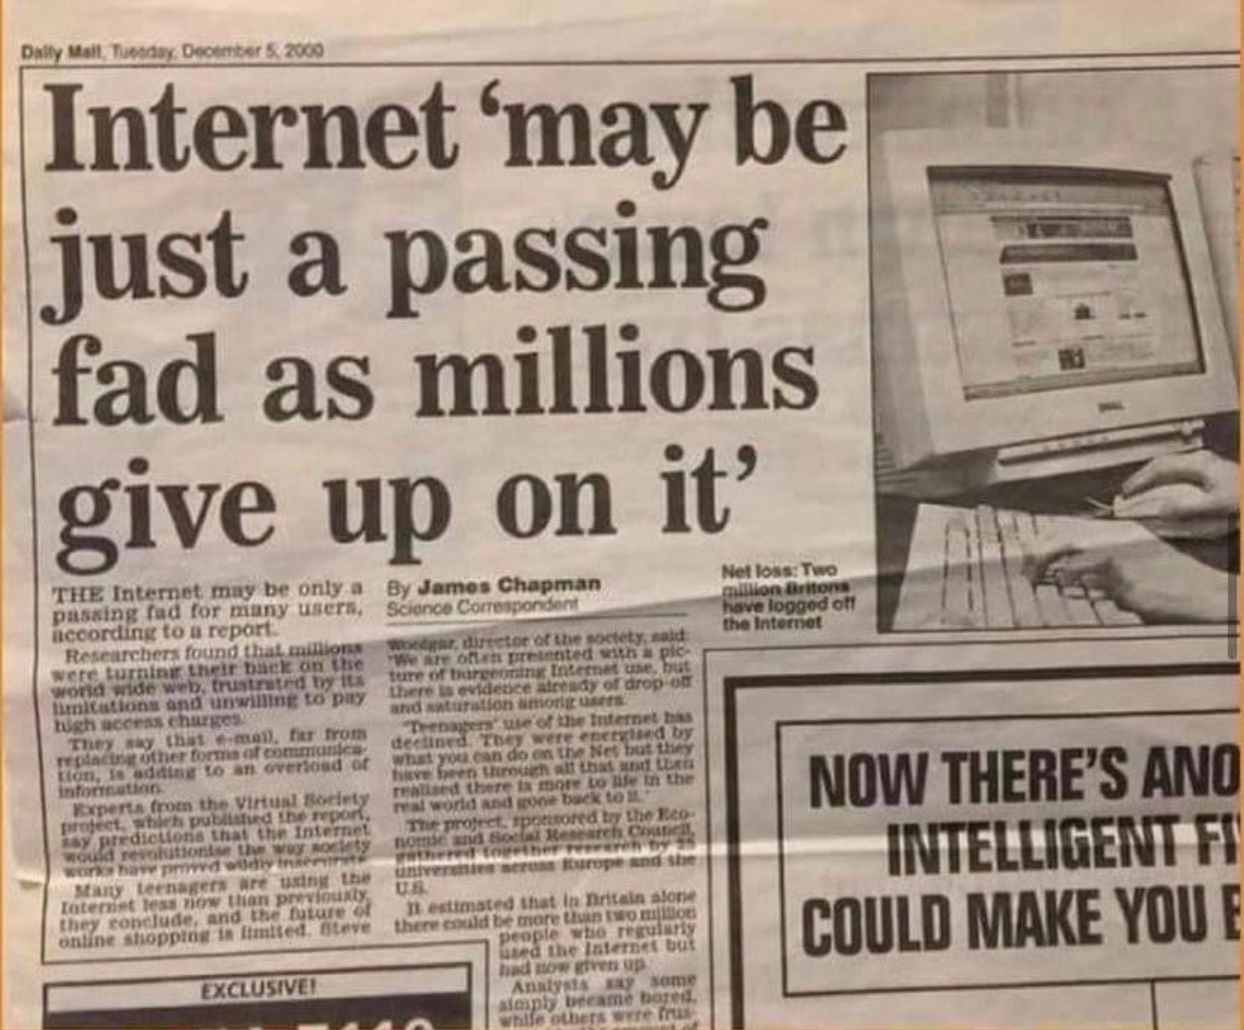 Daily Mail’s Headline “Internet ‘May Be Just A Passing Fad…’”, December 2000